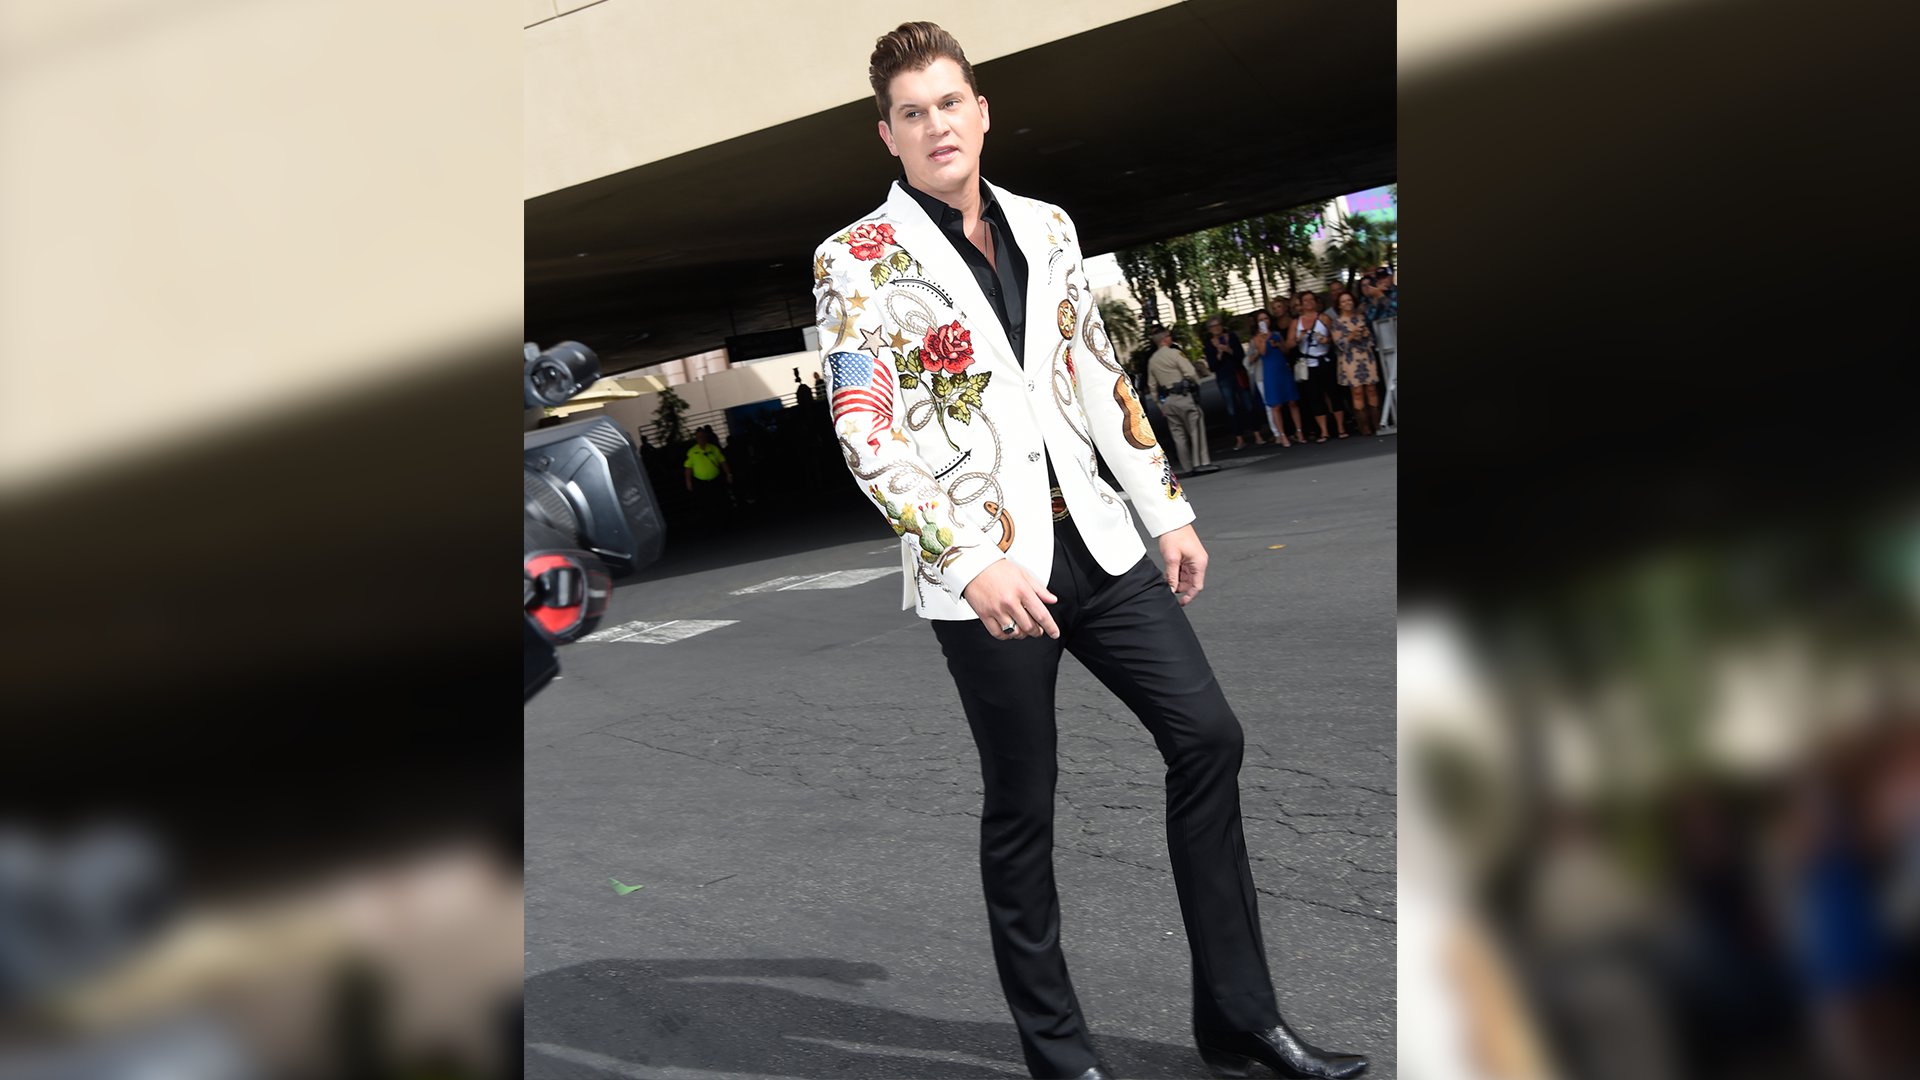 Jon Pardi's bedazzled jacket hints at his upcoming ACM Flashback performance with Alan Jackson.